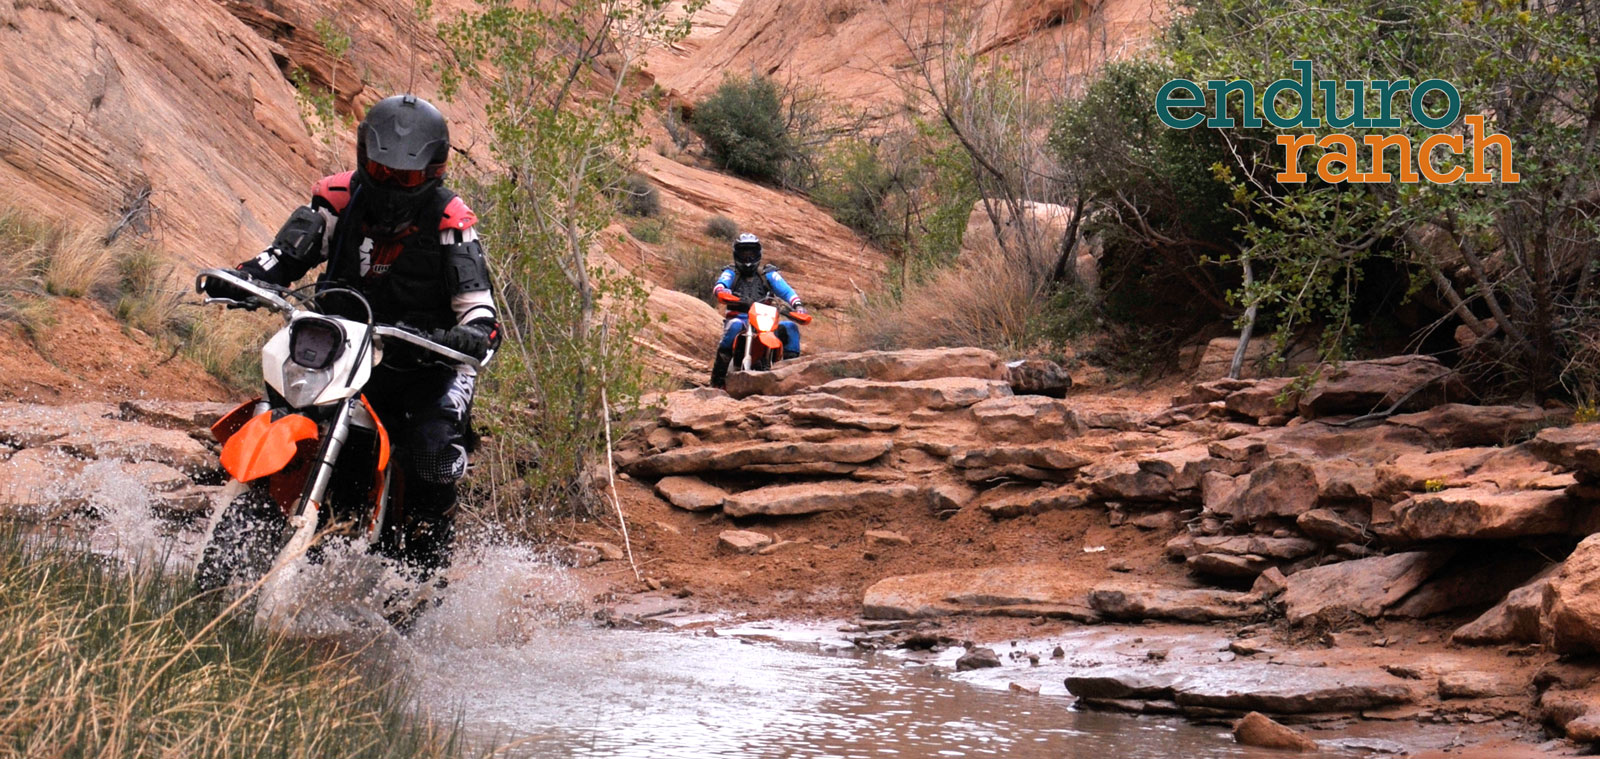 Two off road motorcycle riders in a small canyon bottom riding over rocks and through a creek.